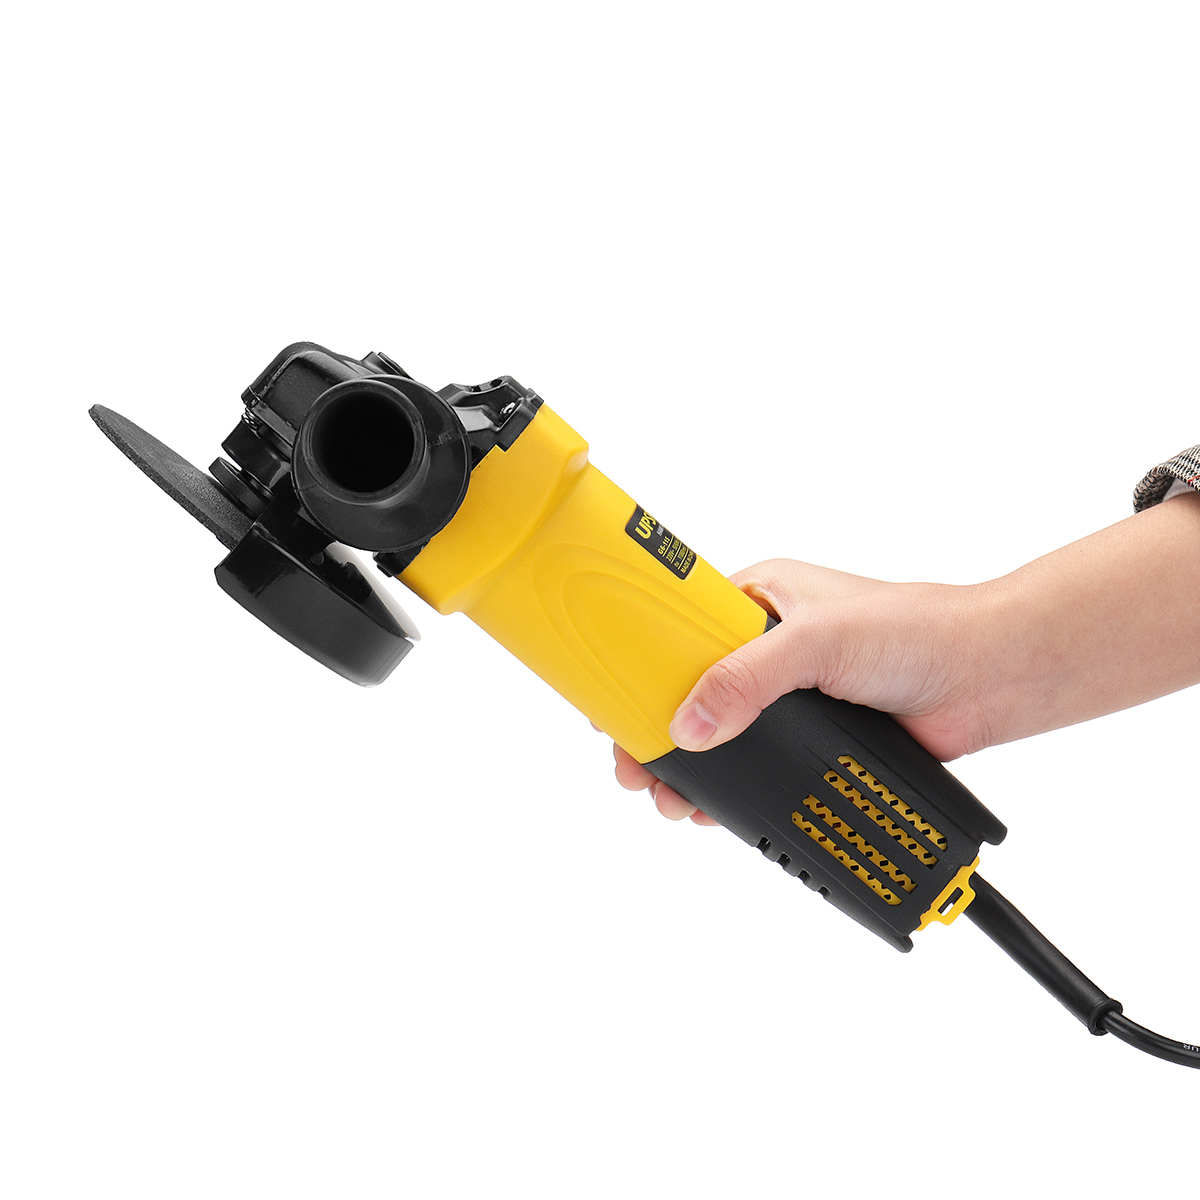 AC220V-880W-Electric-Angle-Grinder-Heavy-Duty-Sanding-Cutting-Grinding-Machine-Tool-115mm-1405035-8